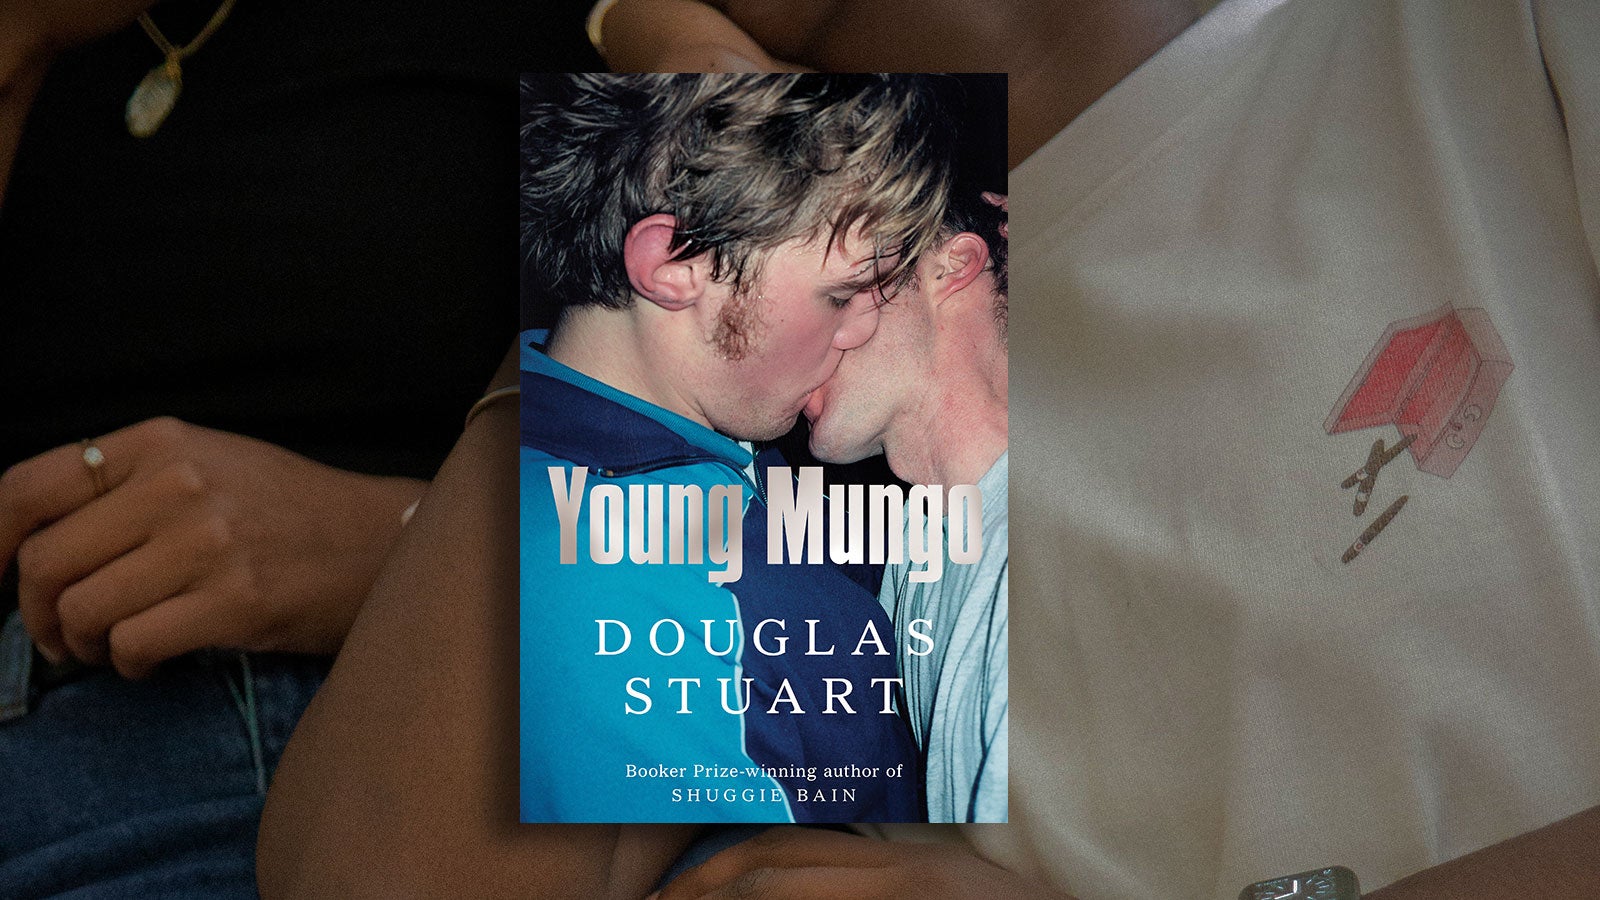 The cover of Young Mungo by Douglas Stuart showing two young men passionately kissing is set against an abstract background showing a young couple cuddling